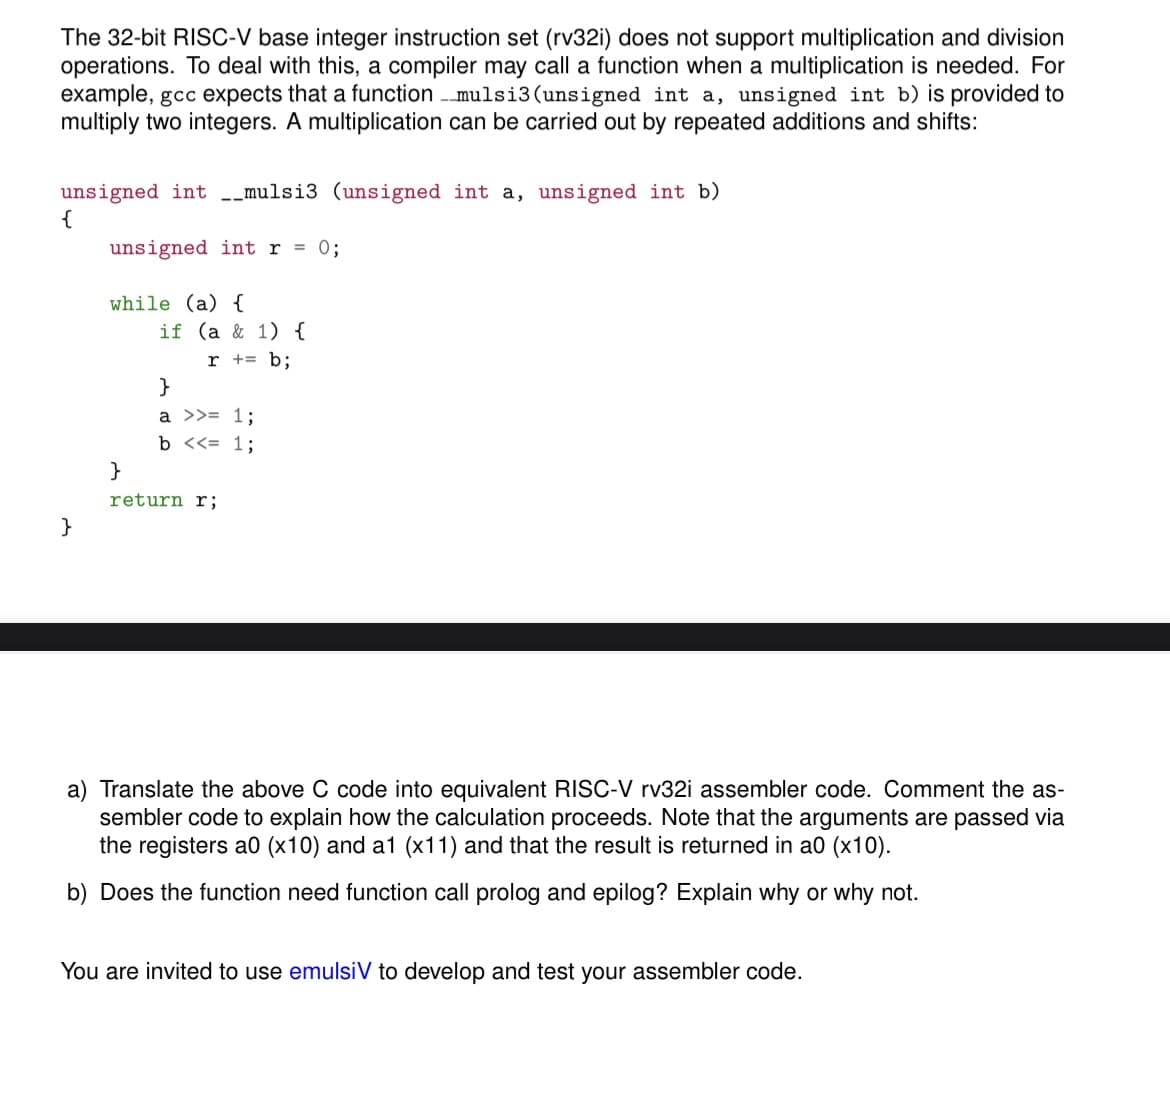 The 32-bit RISC-V base integer instruction set (rv32i) does not support multiplication and division
operations. To deal with this, a compiler may call a function when a multiplication is needed. For
example, gcc expects that a function - mulsi3(unsigned int a, unsigned int b) is provided to
multiply two integers. A multiplication can be carried out by repeated additions and shifts:
unsigned int -_mulsi3 (unsigned int a, unsigned int b)
{
unsigned int r = 0;
while (a) {
if (a & 1) {
r += b;
}
a >>= 1;
b <<= 1;
}
return r;
}
a) Translate the above C code into equivalent RISC-V rv32i assembler code. Comment the as-
sembler code to explain how the calculation proceeds. Note that the arguments are passed via
the registers a0 (x10) and a1 (x11) and that the result is returned in a0 (x10).
b) Does the function need function call prolog and epilog? Explain why or why not.
You are invited to use emulsiV to develop and test your assembler code.
